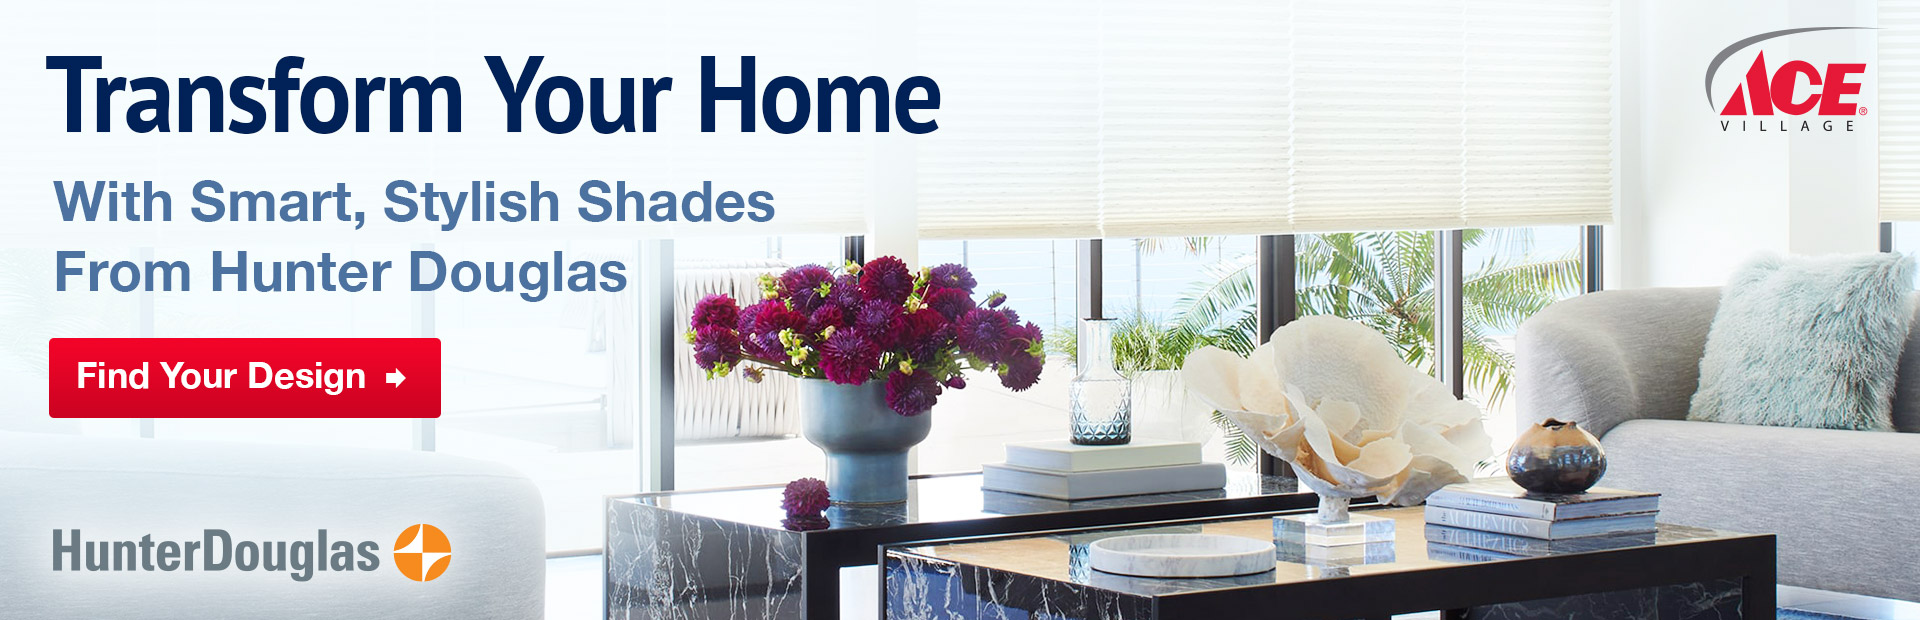 Transform Your Home With Smart, Stylish Shades From Hunter Douglas